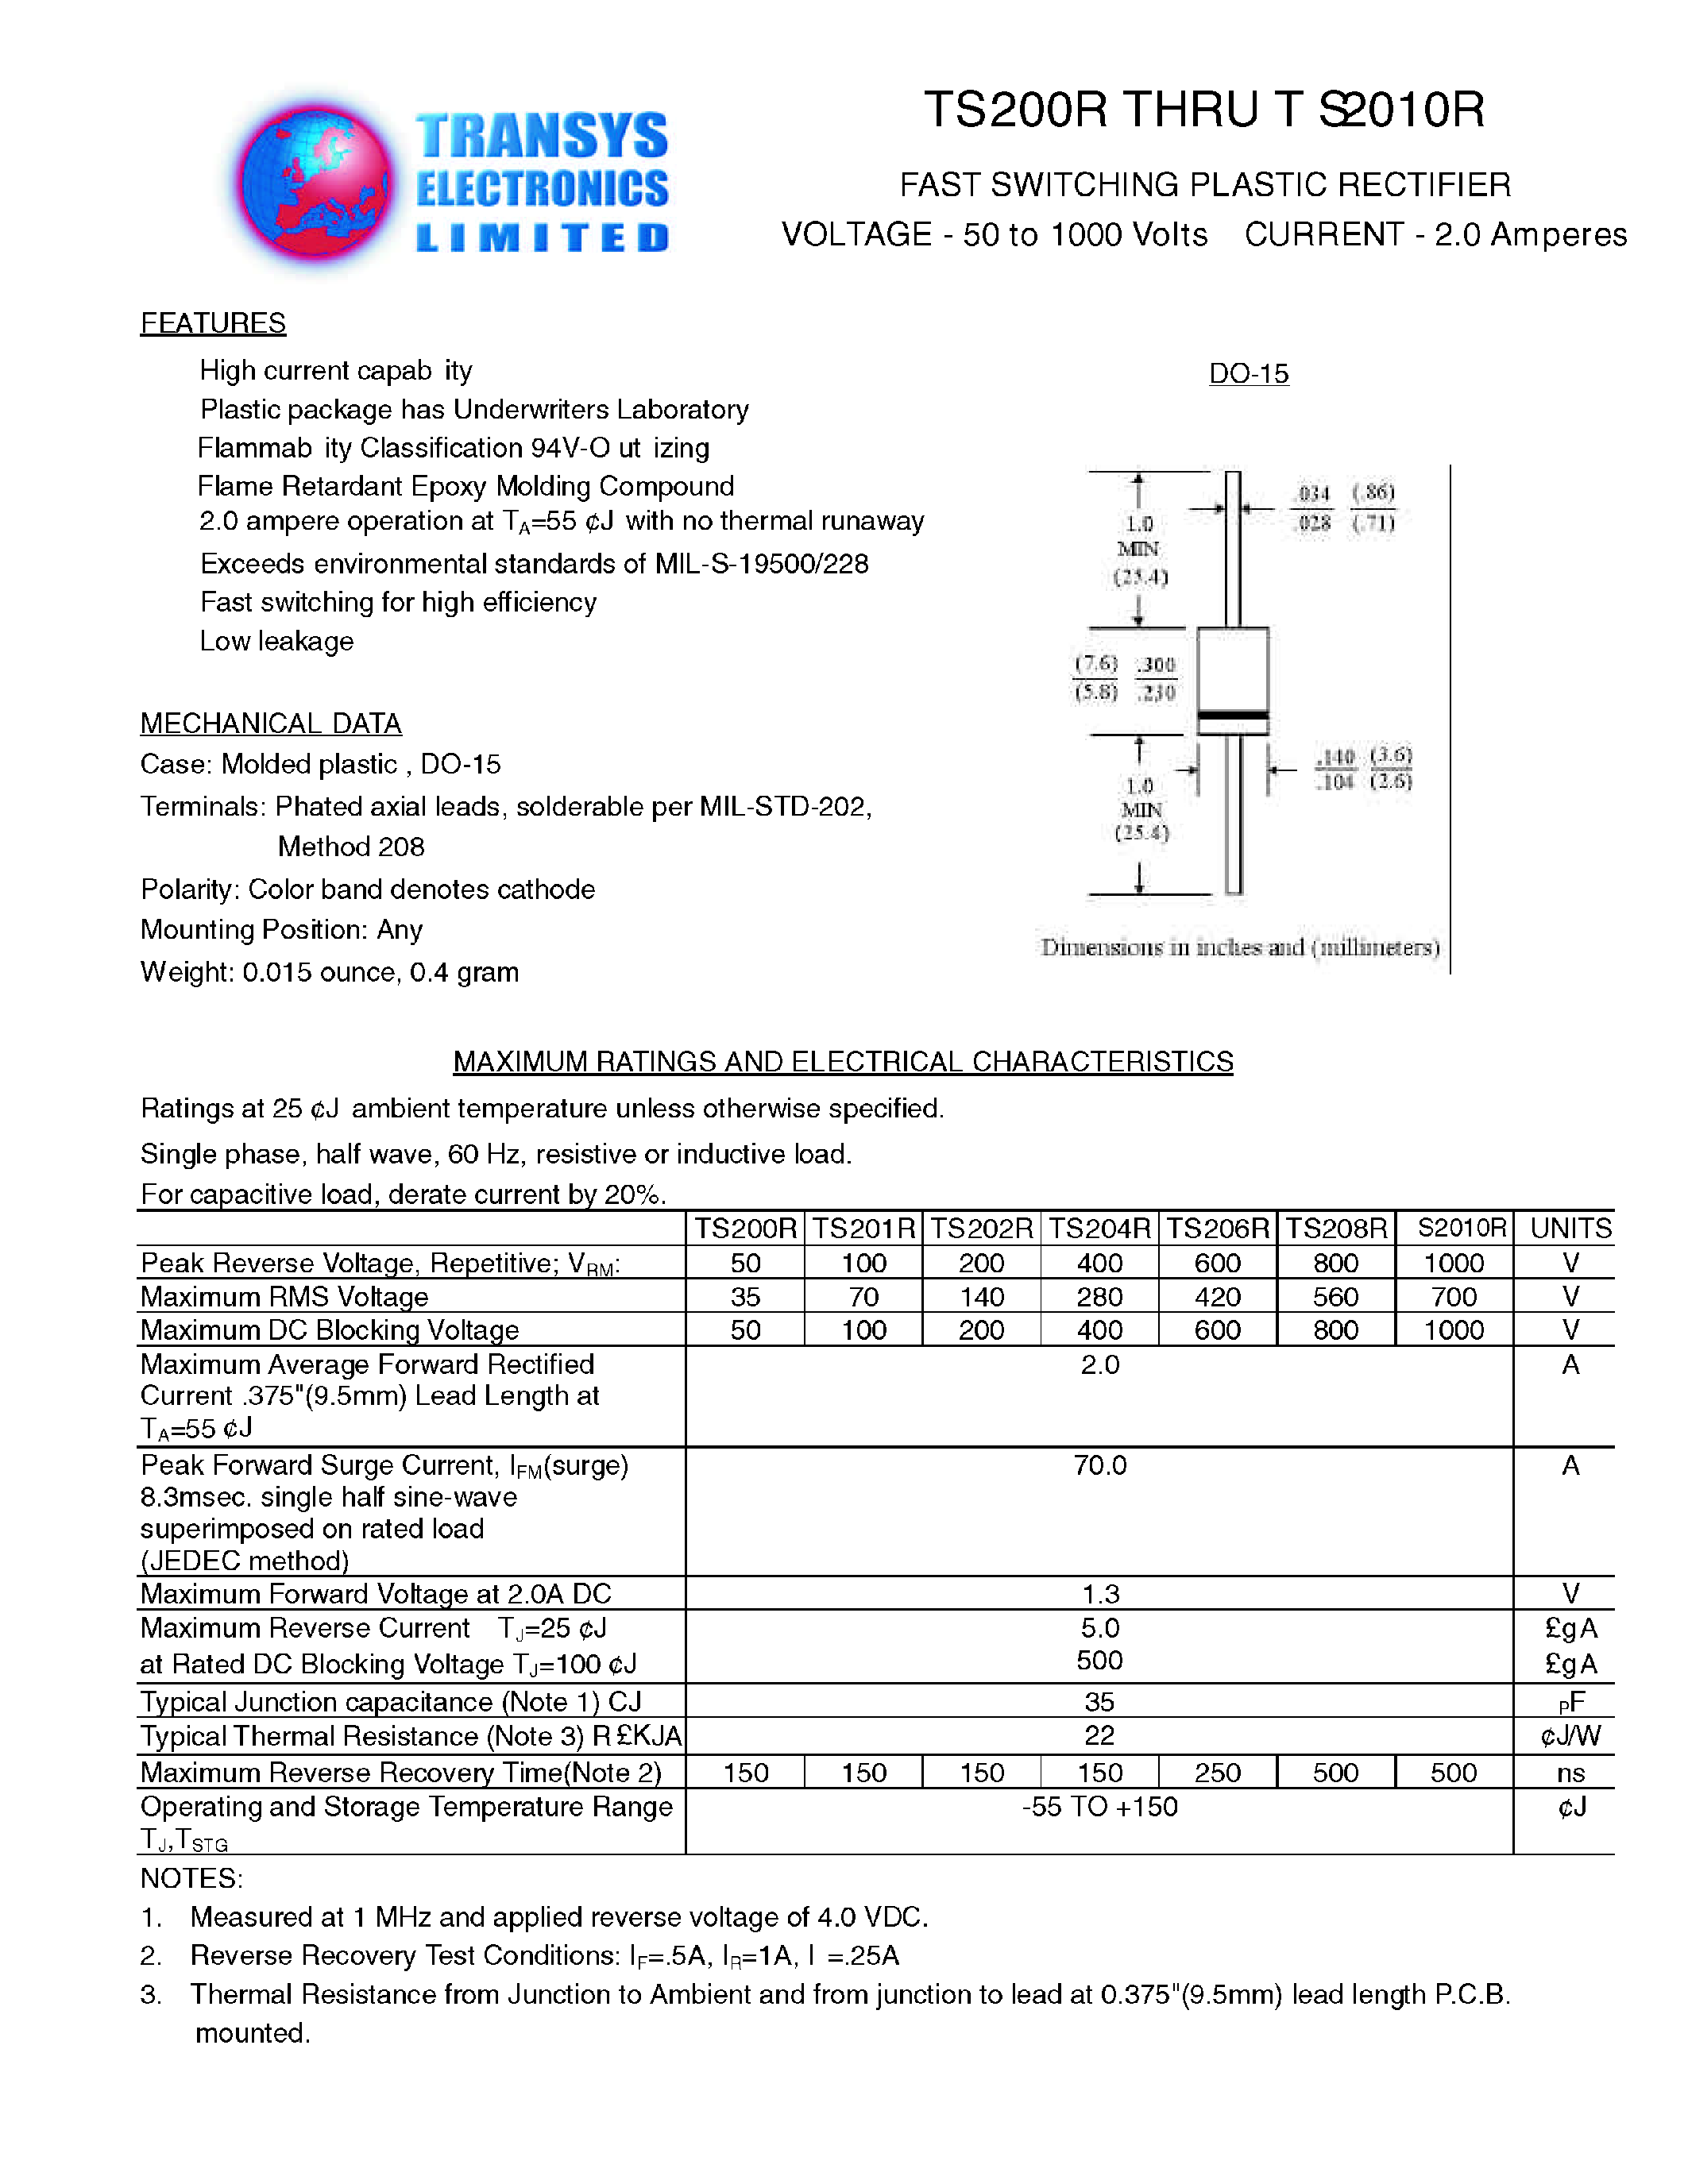 Datasheet TS200R - FAST SWITCHIING RECTIFIER(Reverse Voltage - 50 to 1000 Volts/ Current - 2.0Ampere) page 1